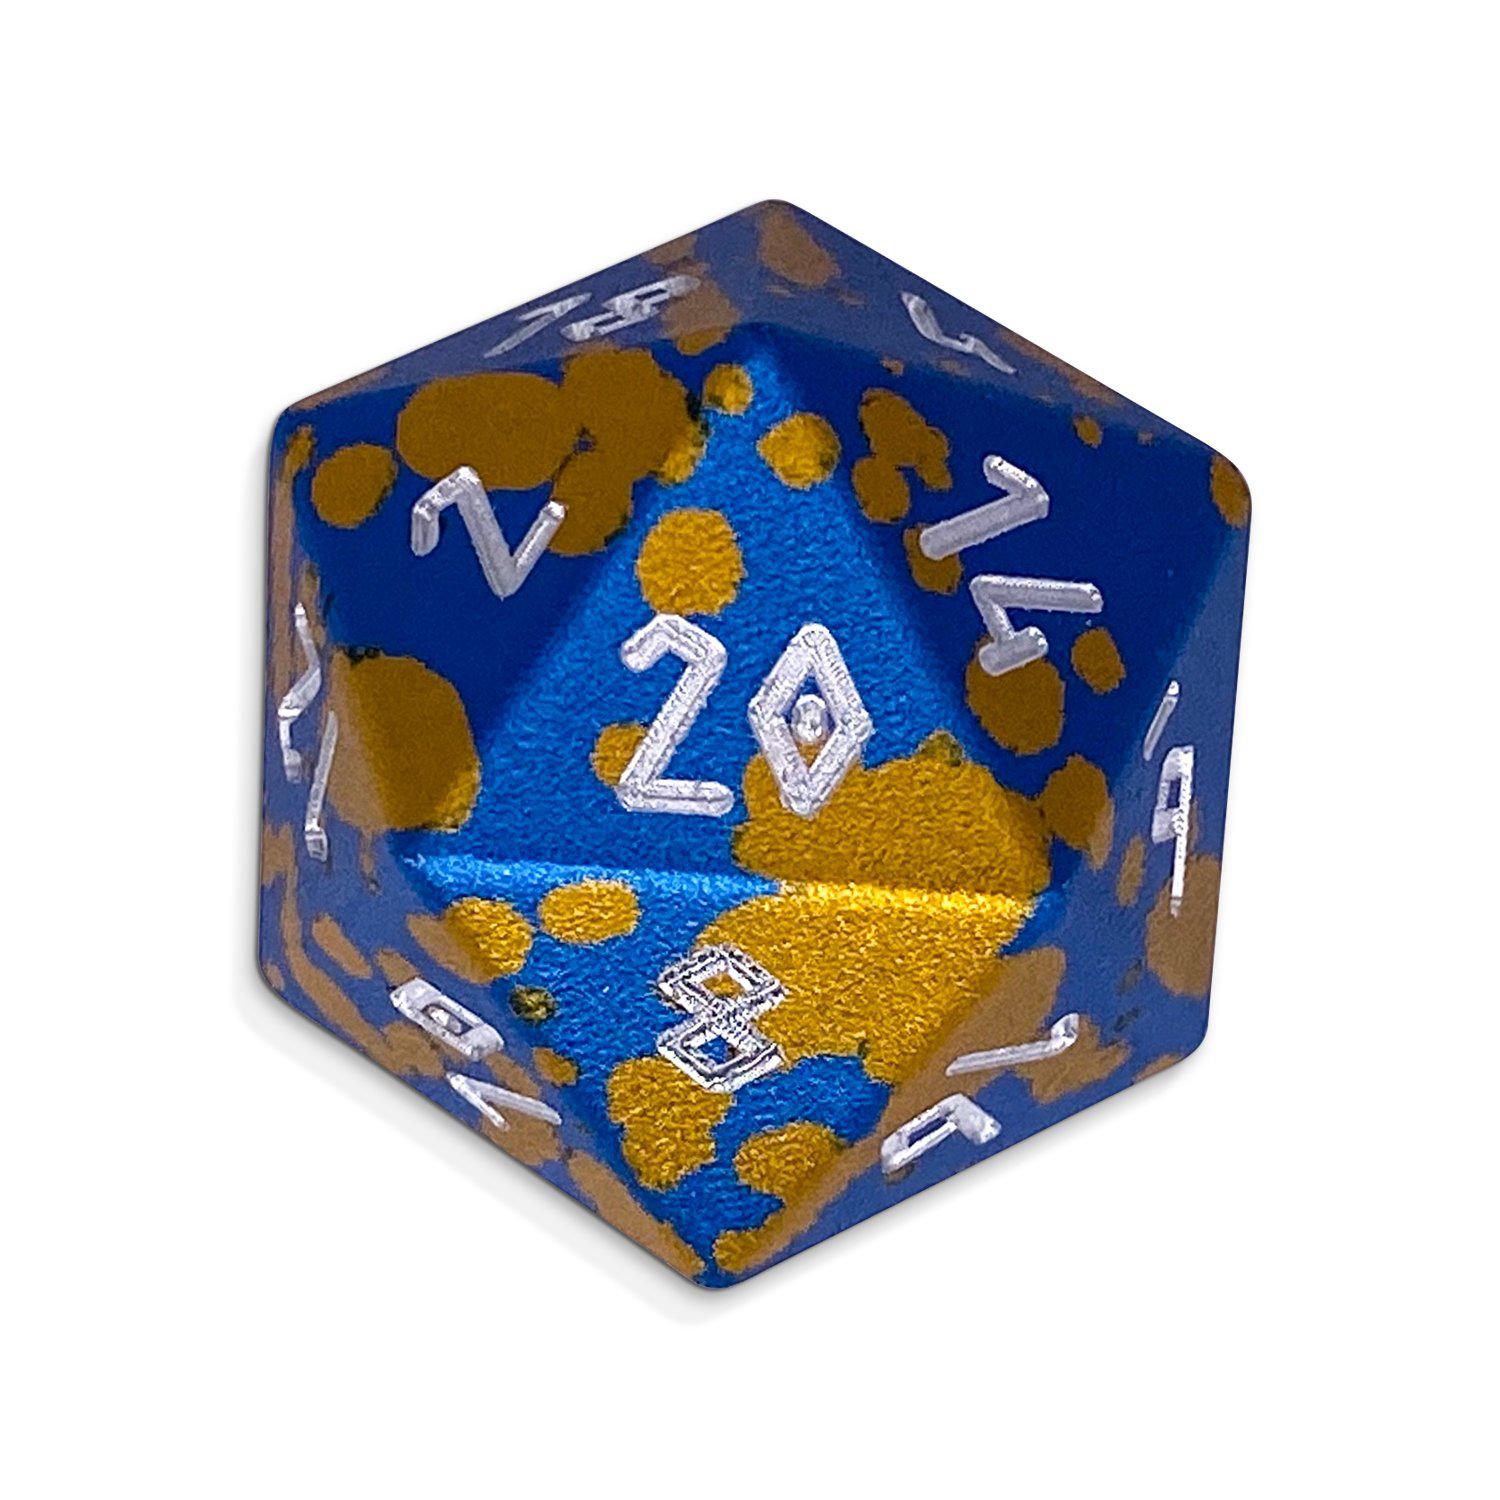 Single Wondrous Dice® D20 in Mimic by Norse Foundry® 6063 Aircraft Grade Aluminum - NOR 02412